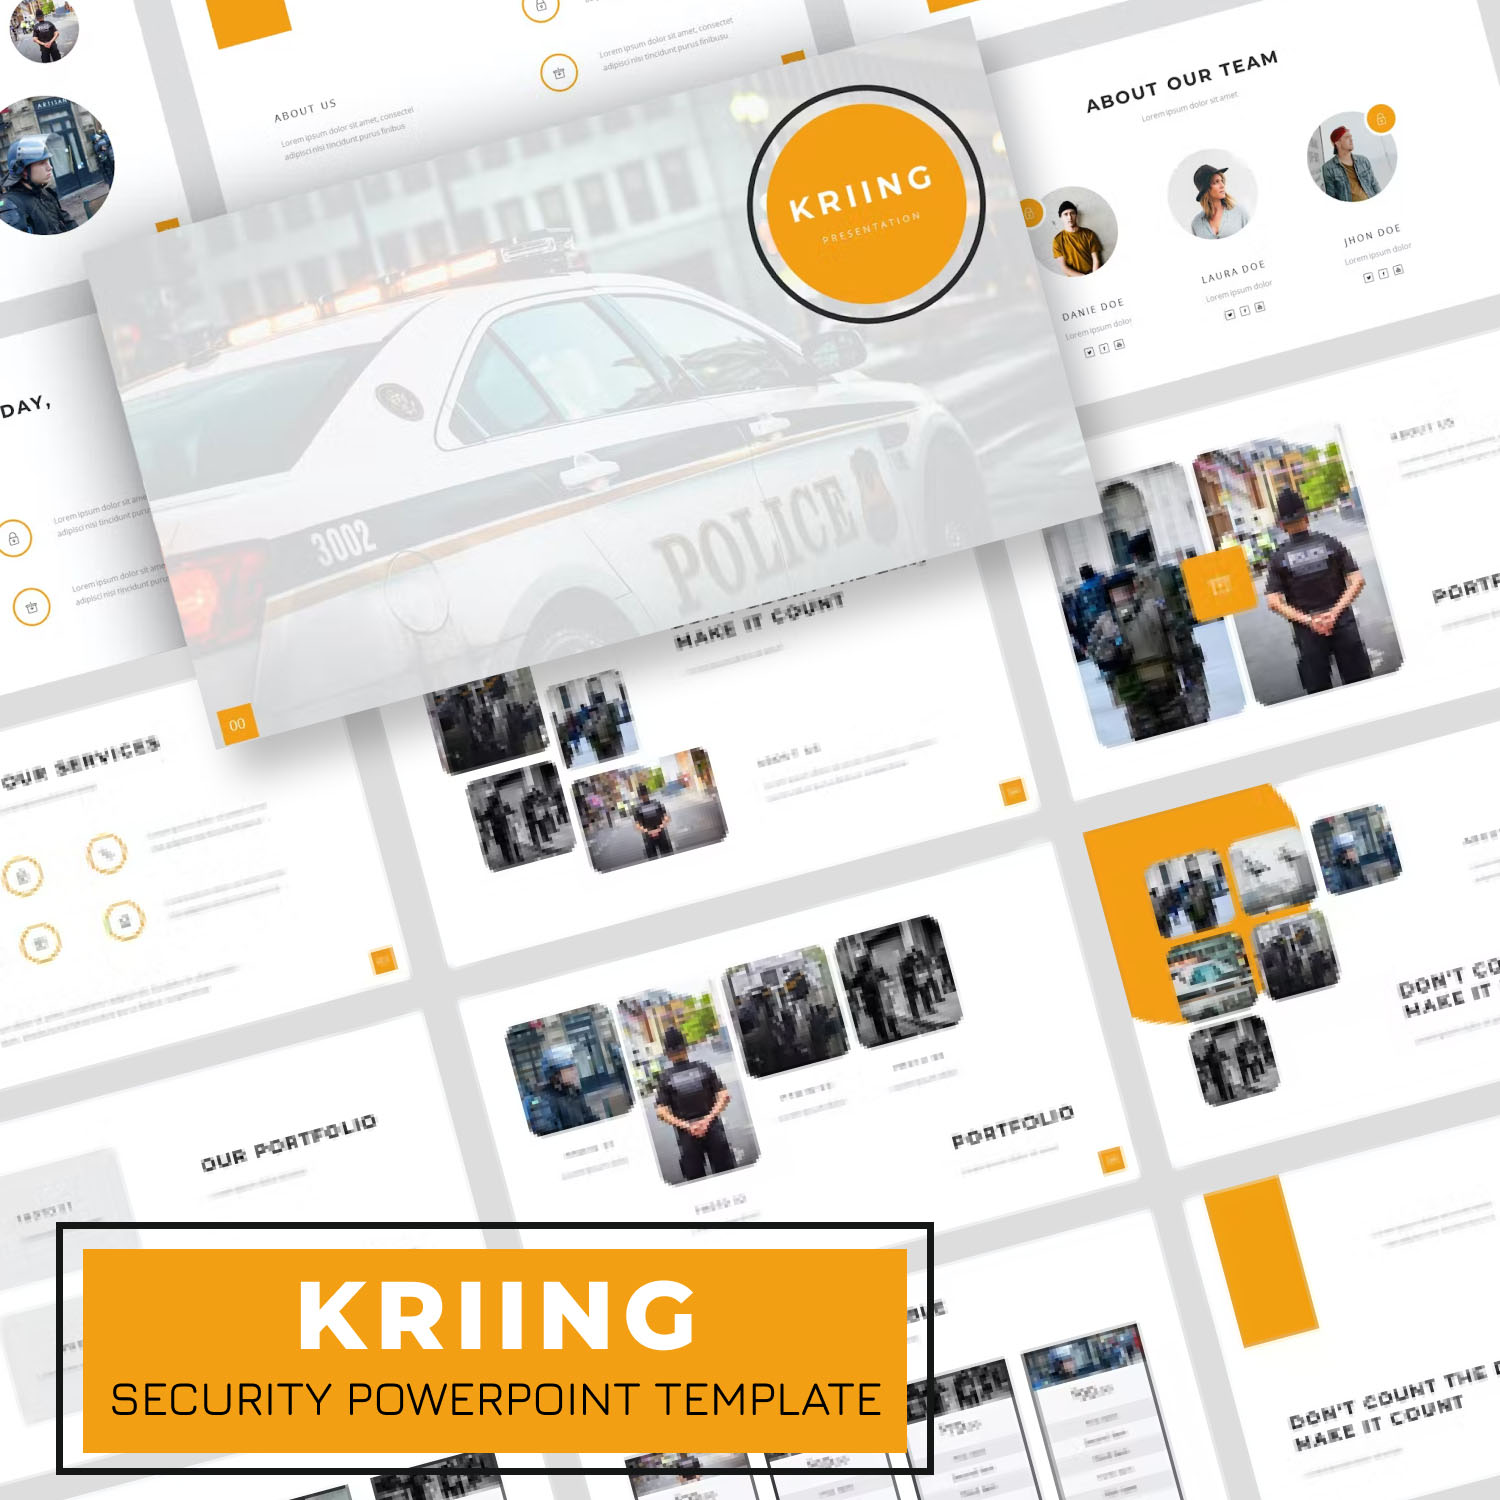 Preview kriing security powerpoint template.